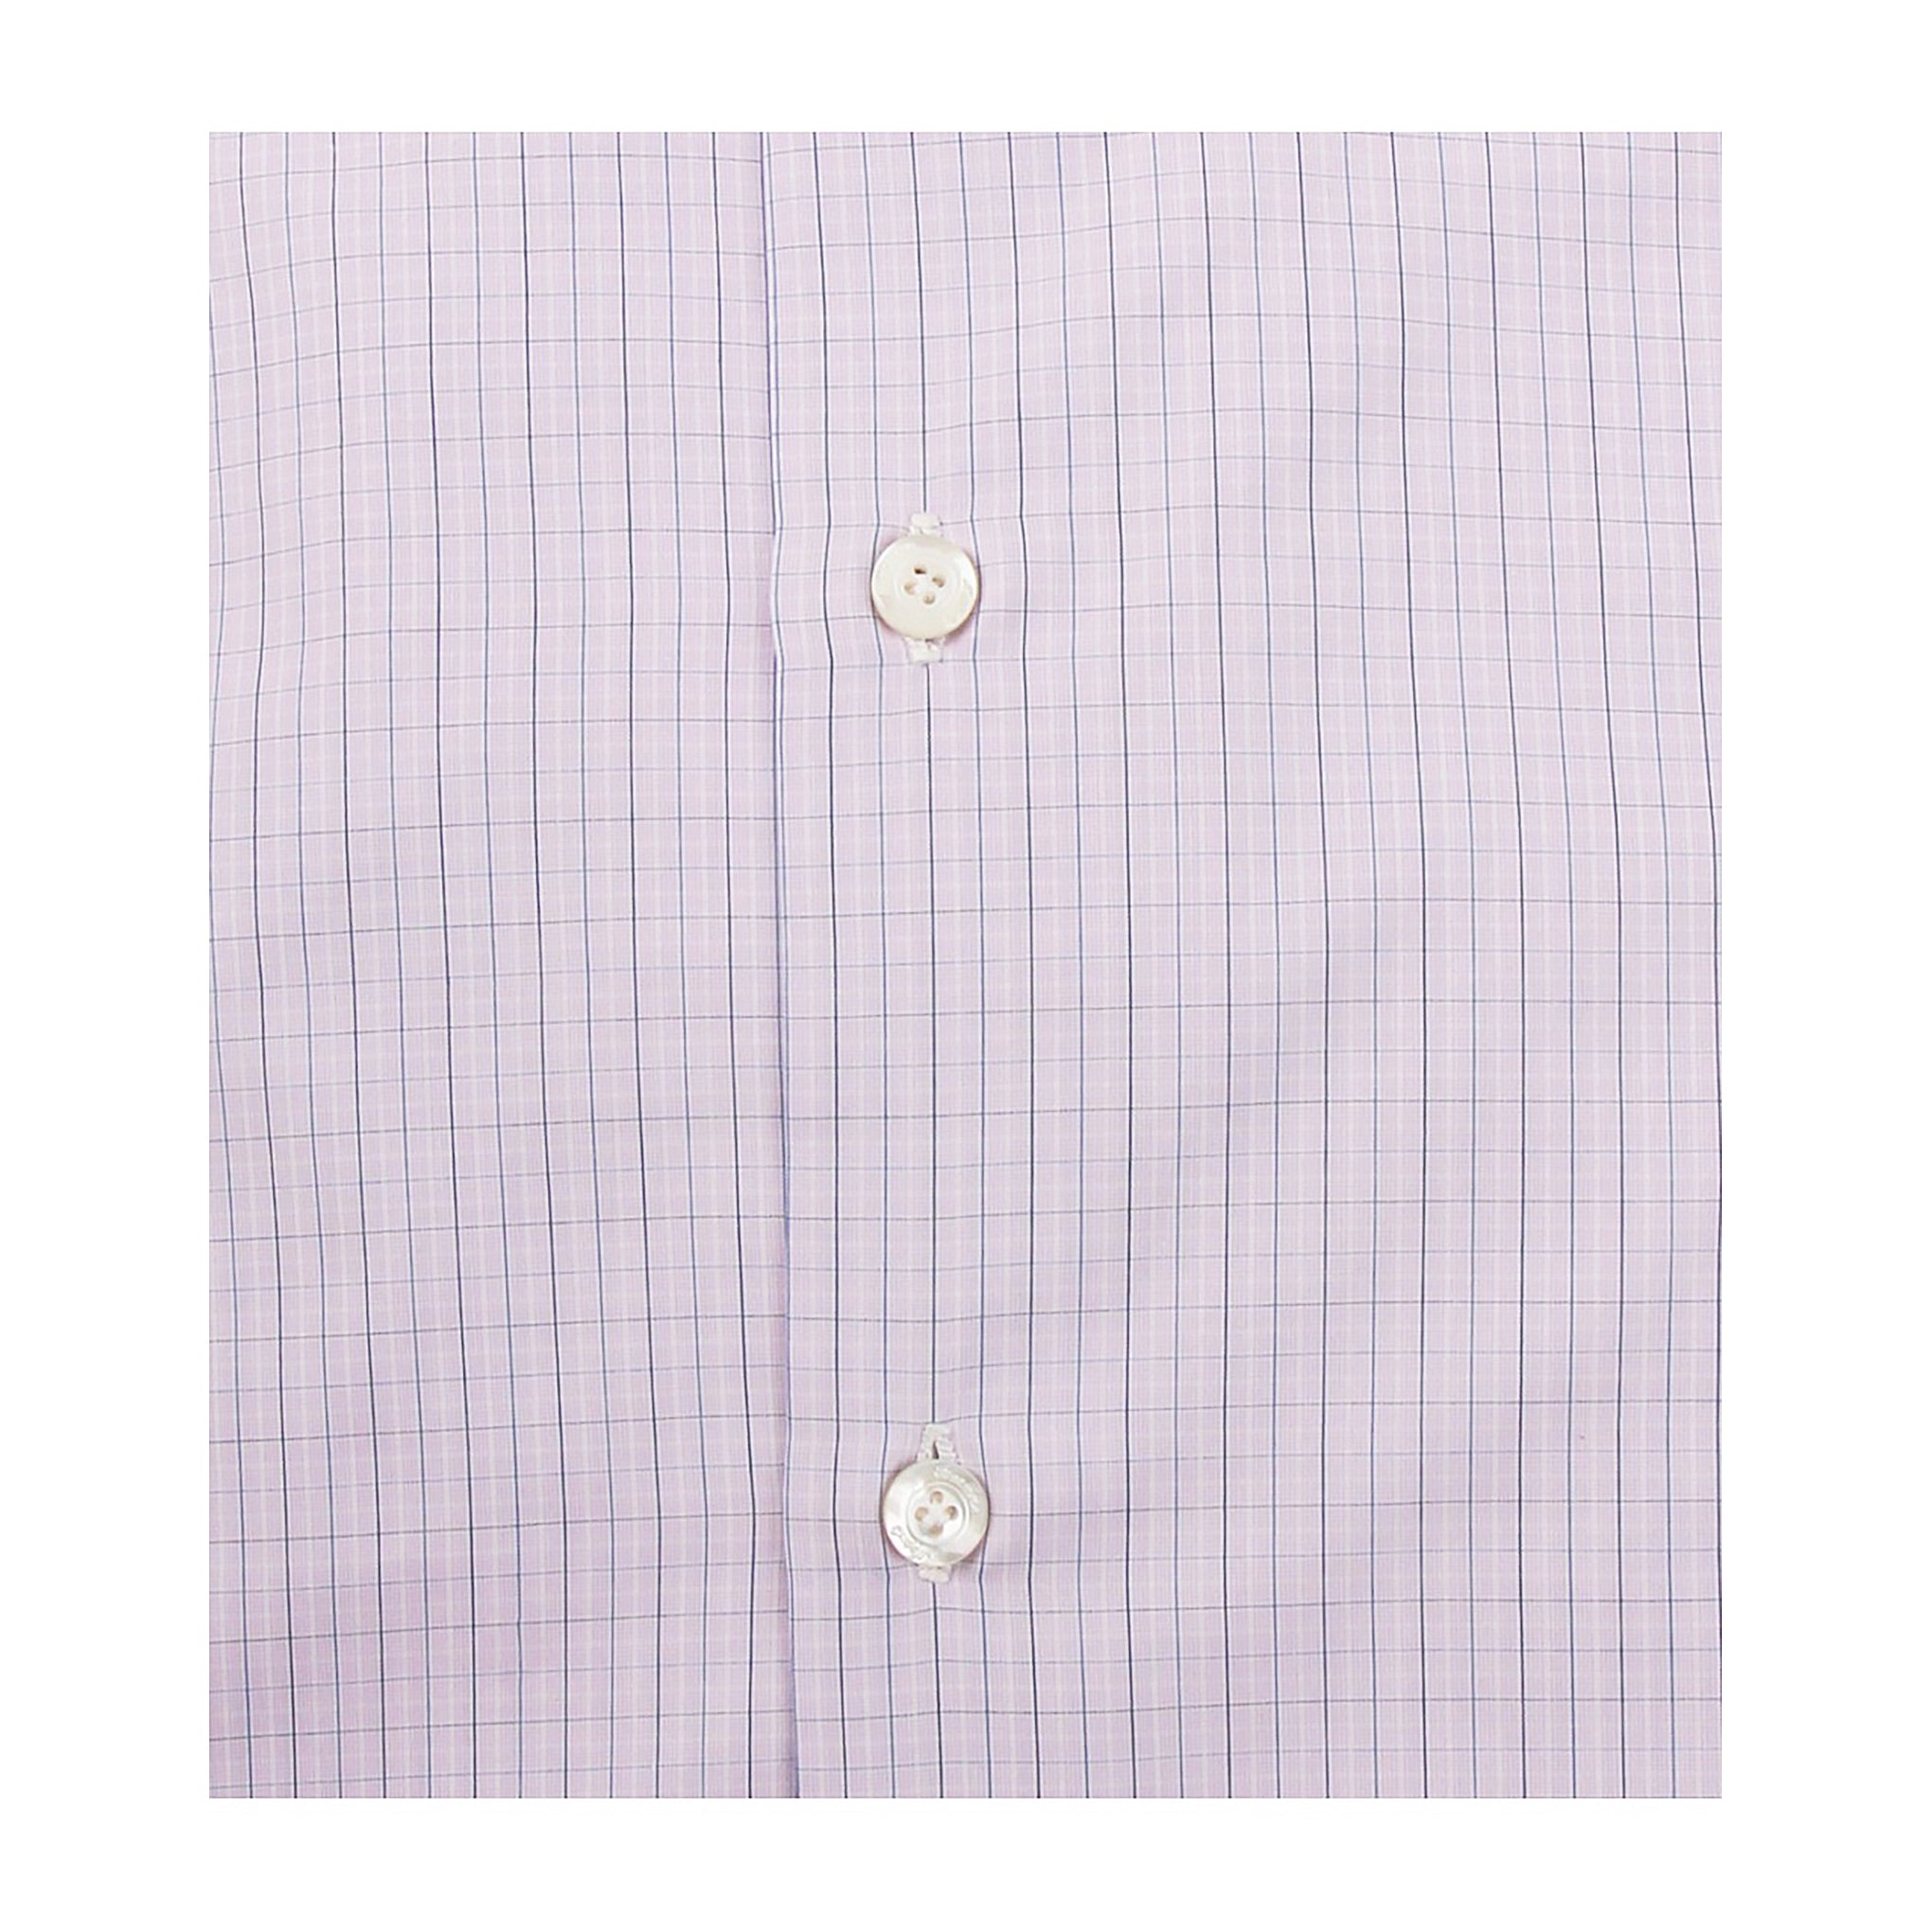 Classic shirt 170 a due check Napoli light blue or pink Finamore 1925